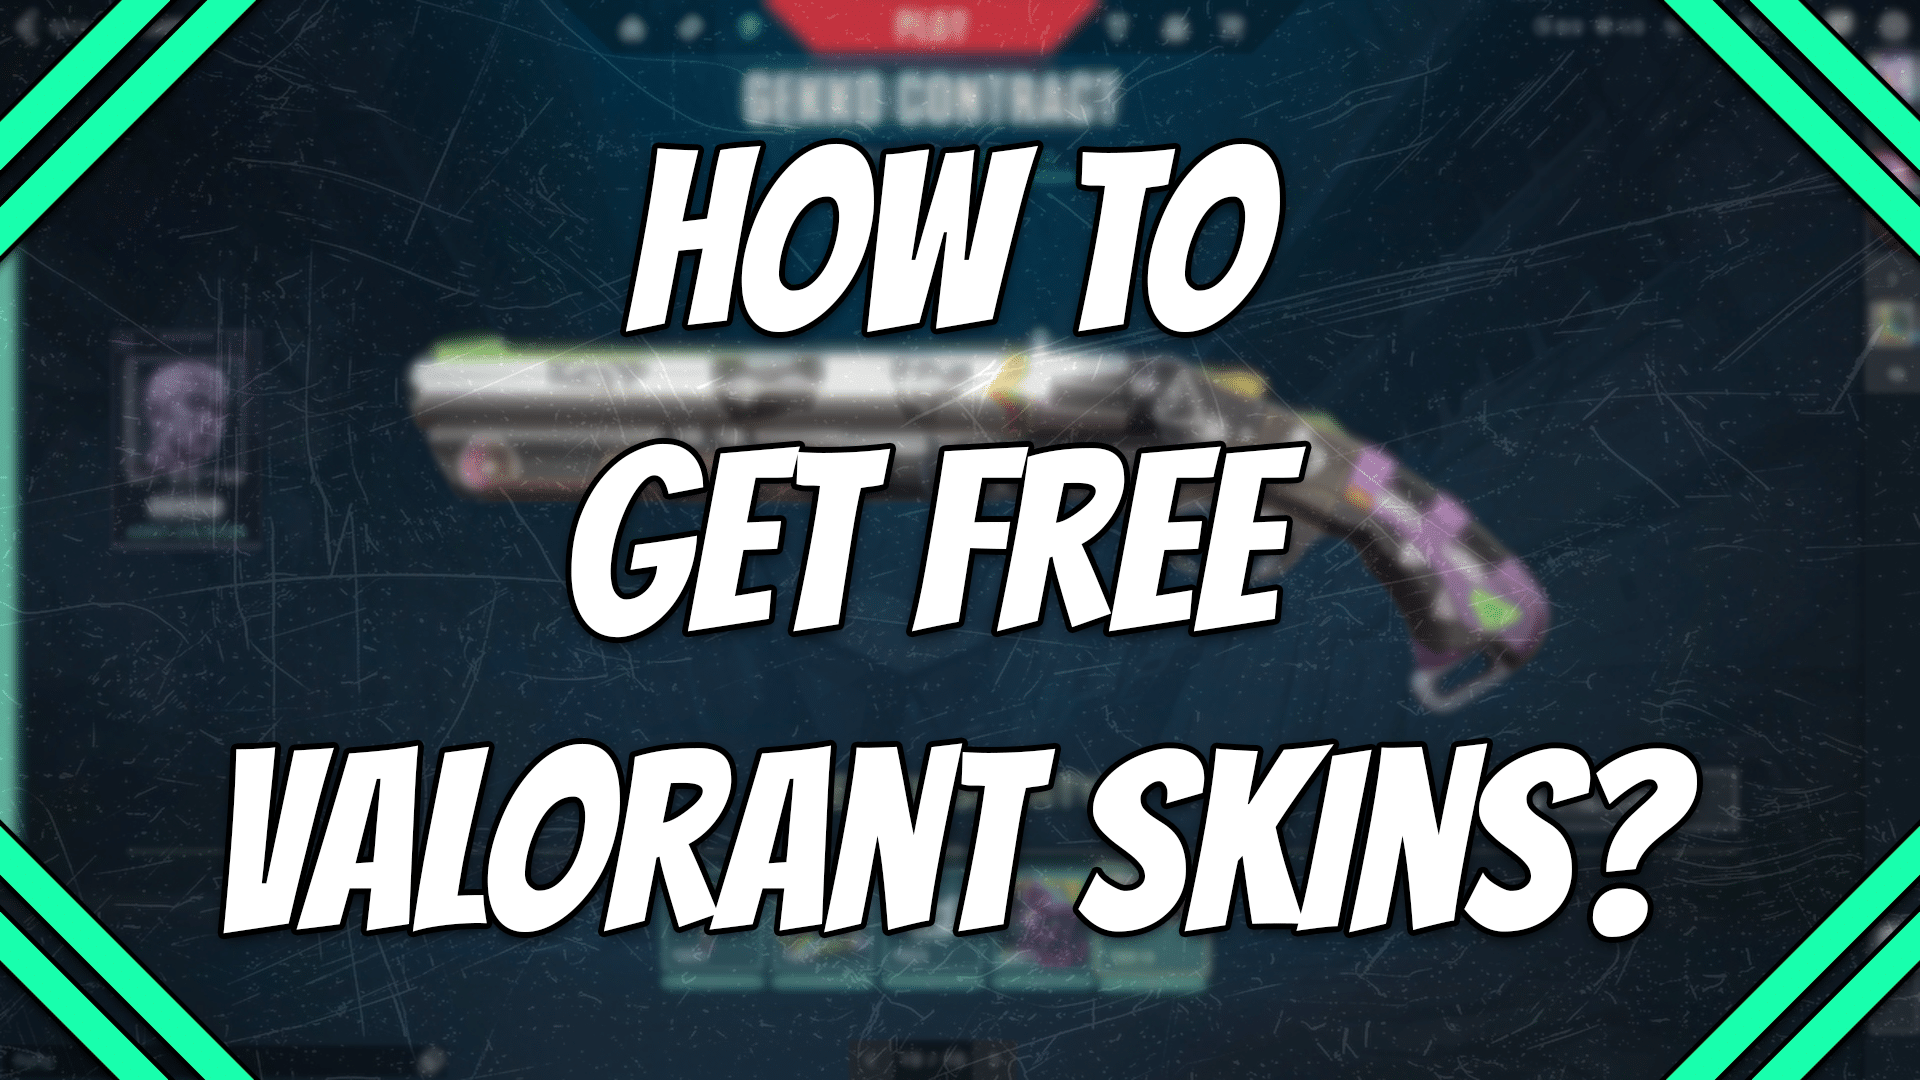 How to get free valorant skins title card